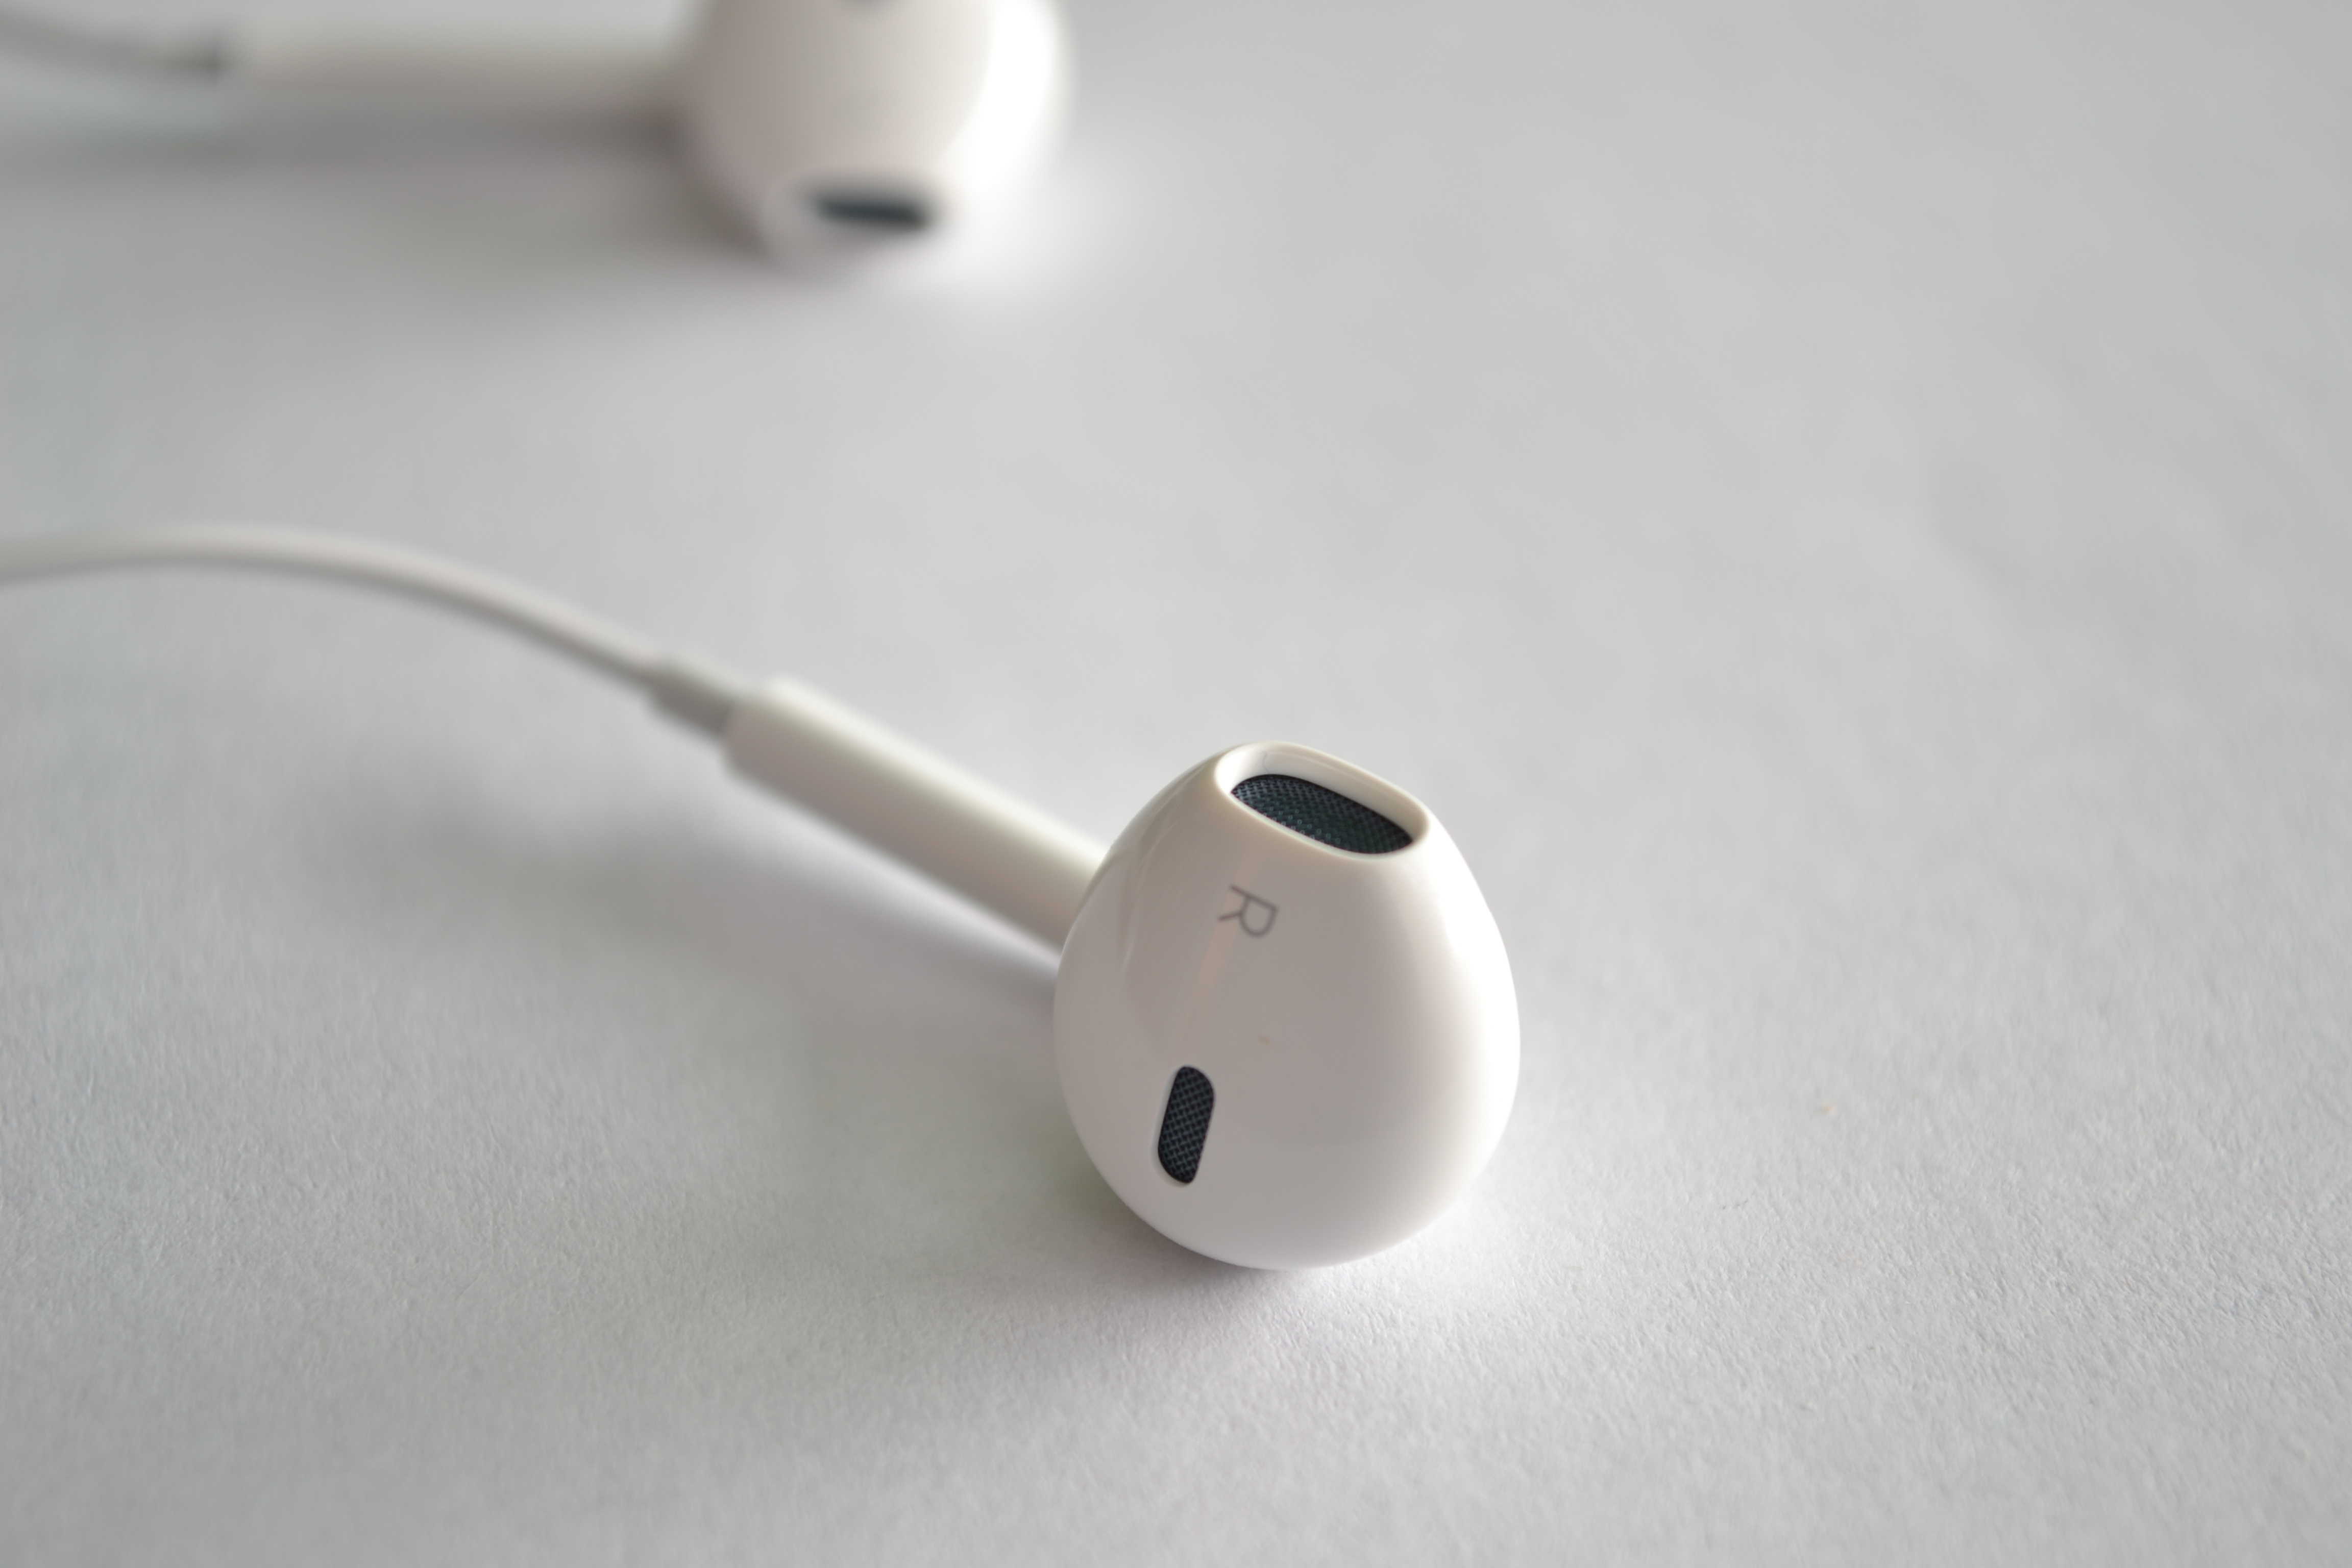 Apple's new EarPods brought big improvements over previous versions.